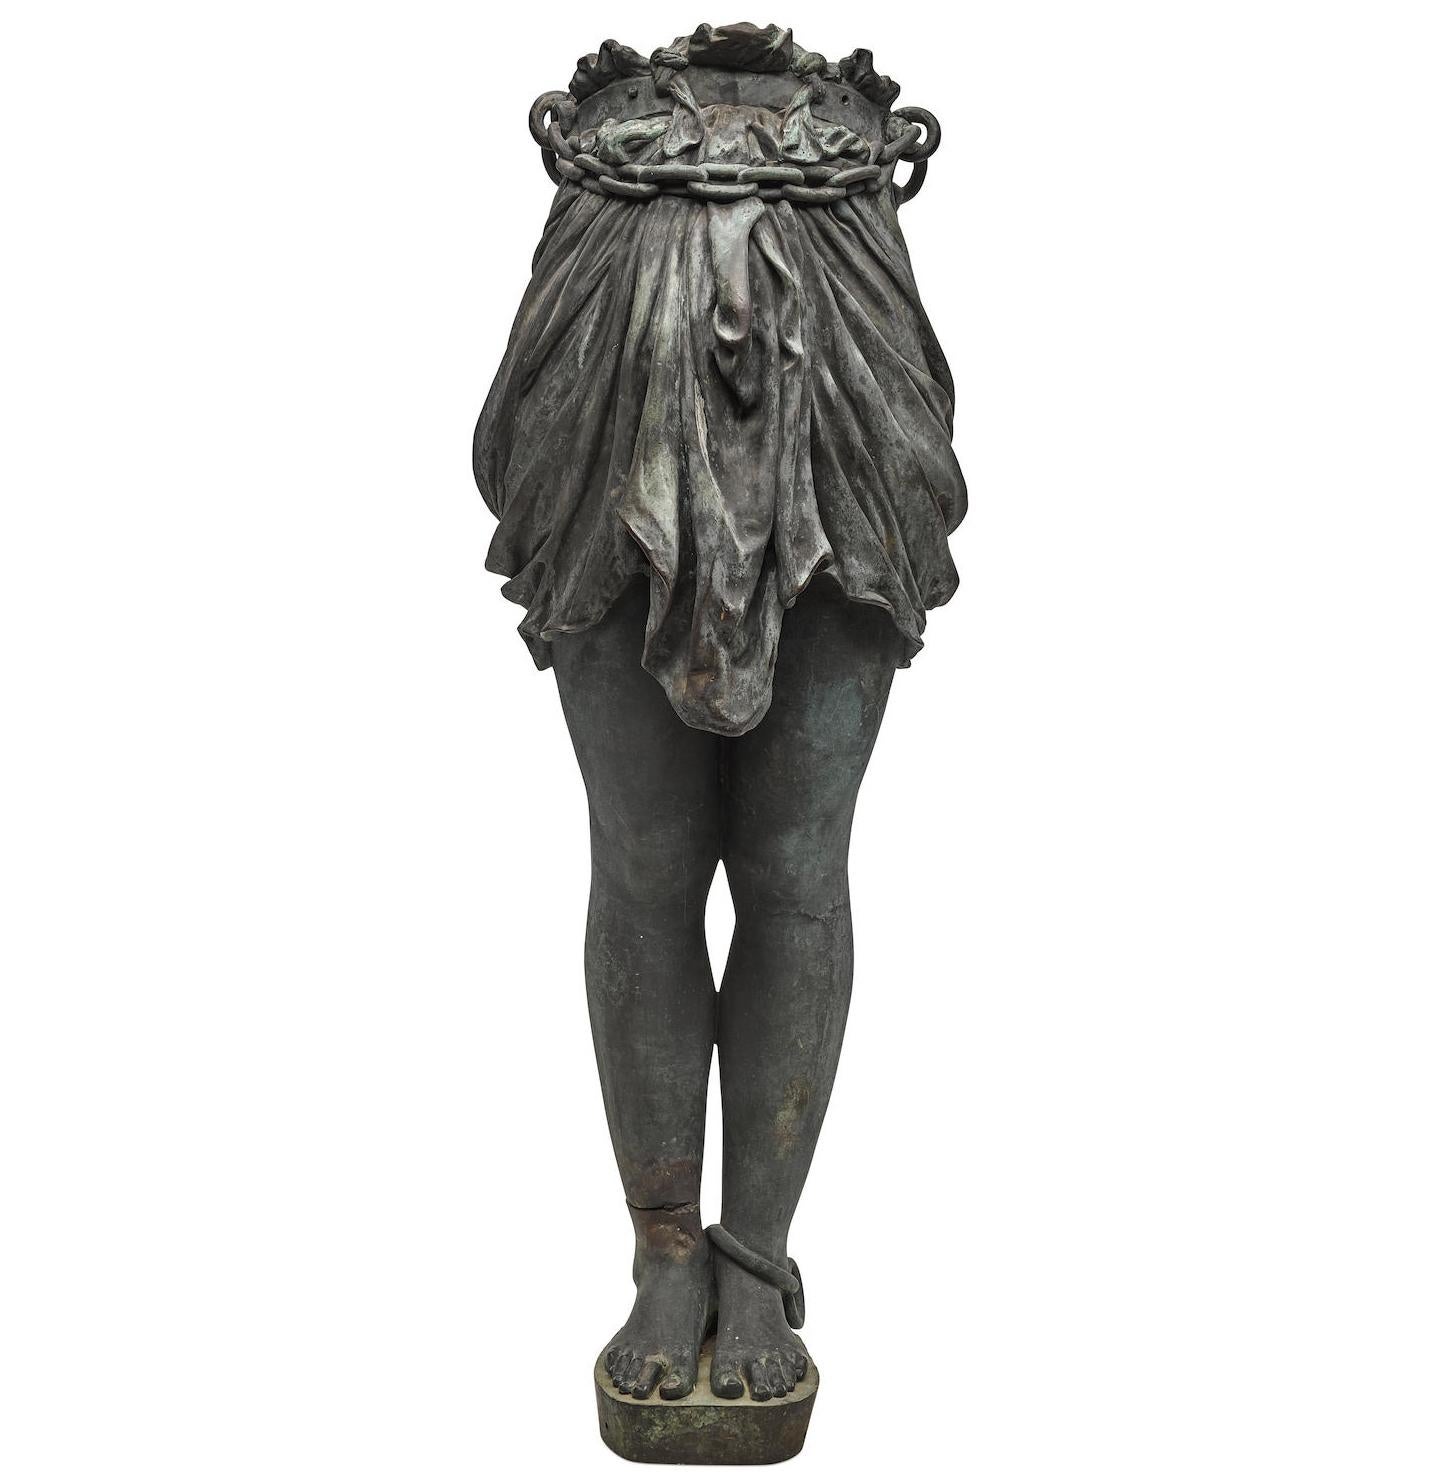 A fine over-lifesize patinated bronze Greco roman revival style standing half-figure of Andromeda, probably French, late 19th century or early 20th century. The heavily finely cast-bronze lower female extremity with her waist wrapped with a heavy